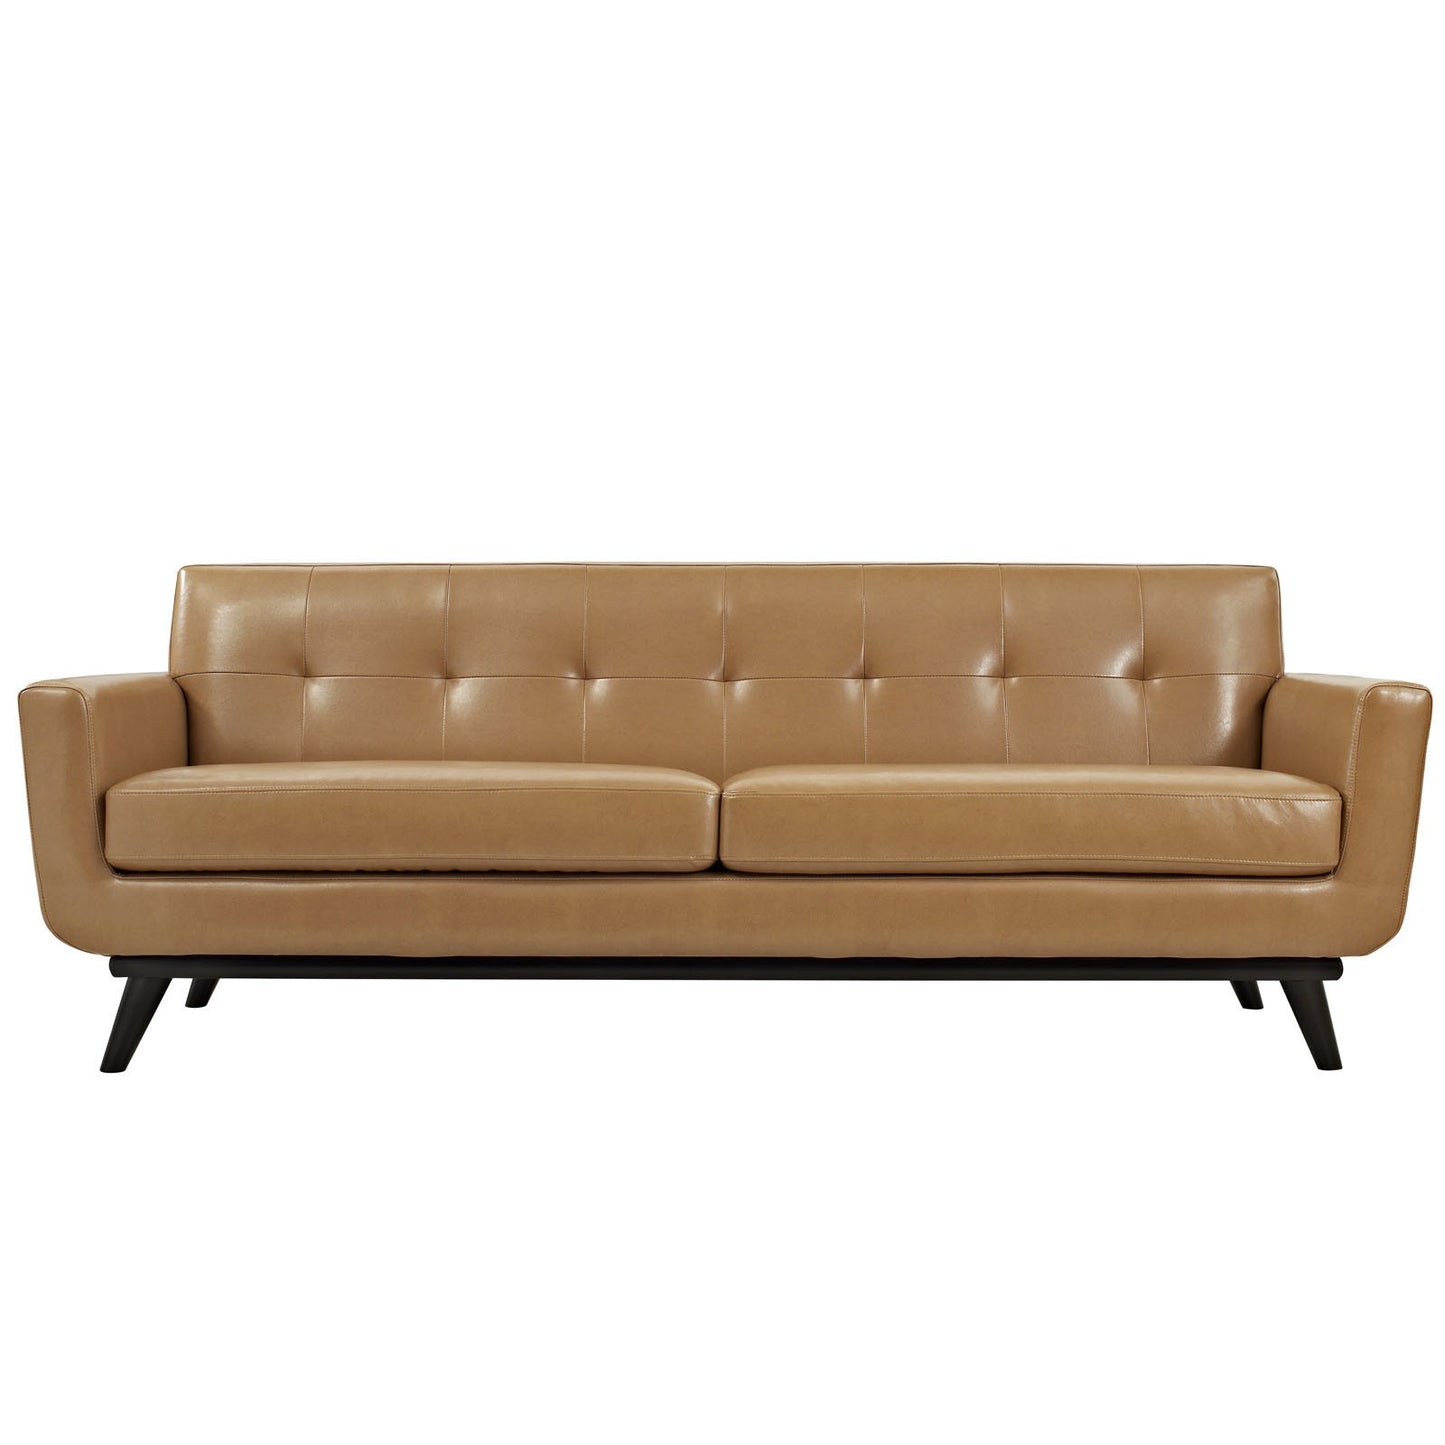 Queen Mary Leather Sofa - living-essentials